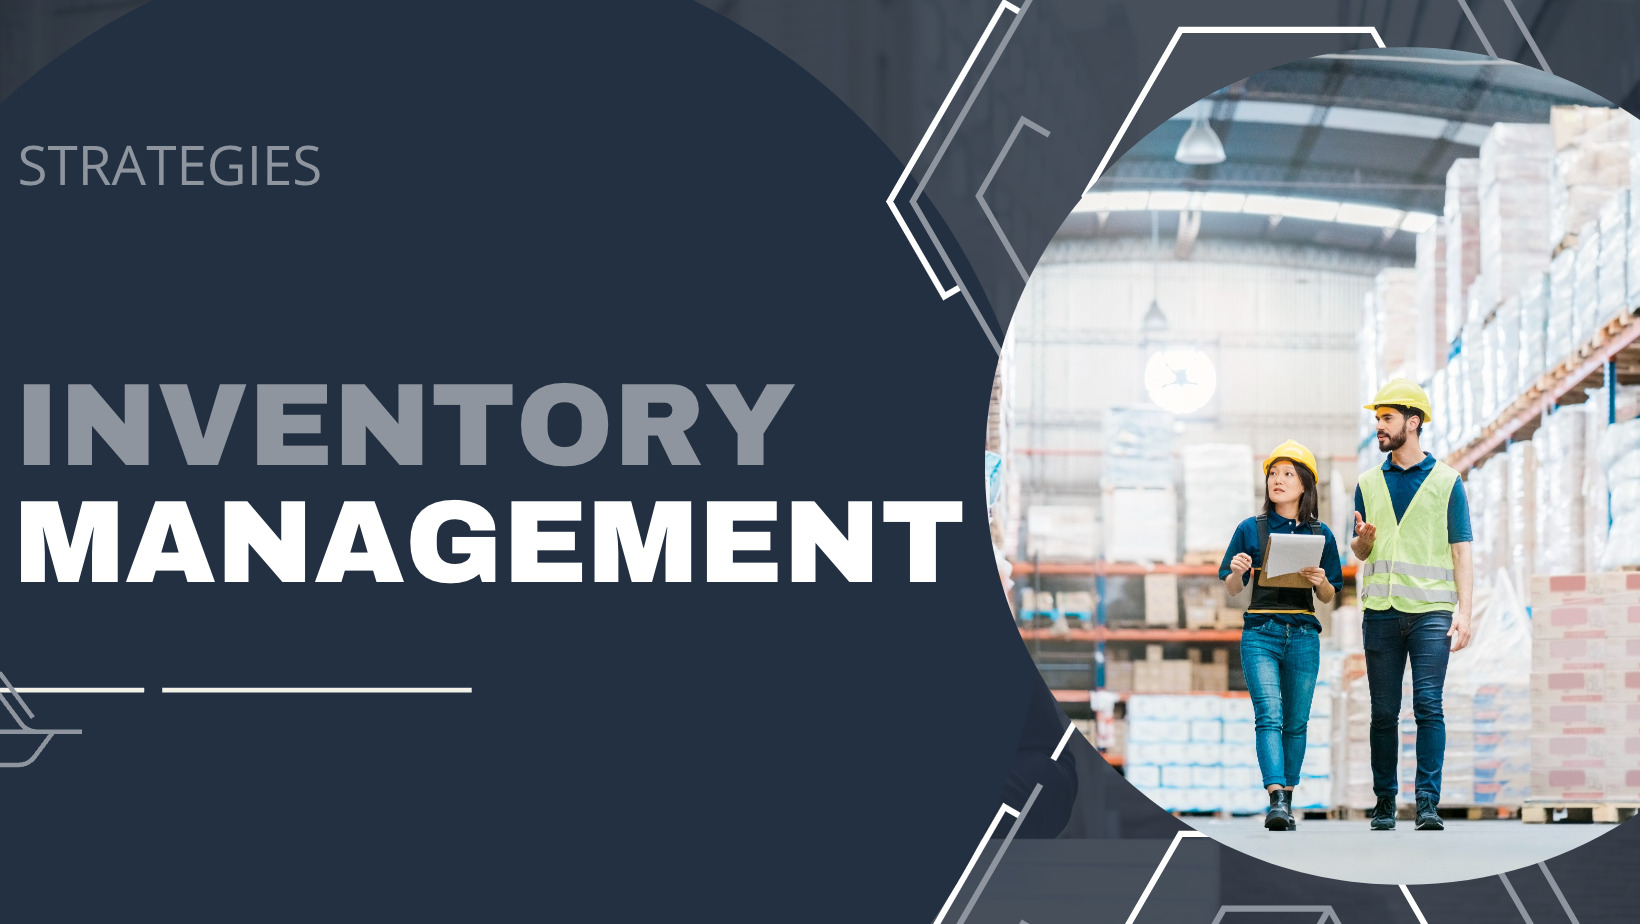 Effective Strategies For Inventory Management